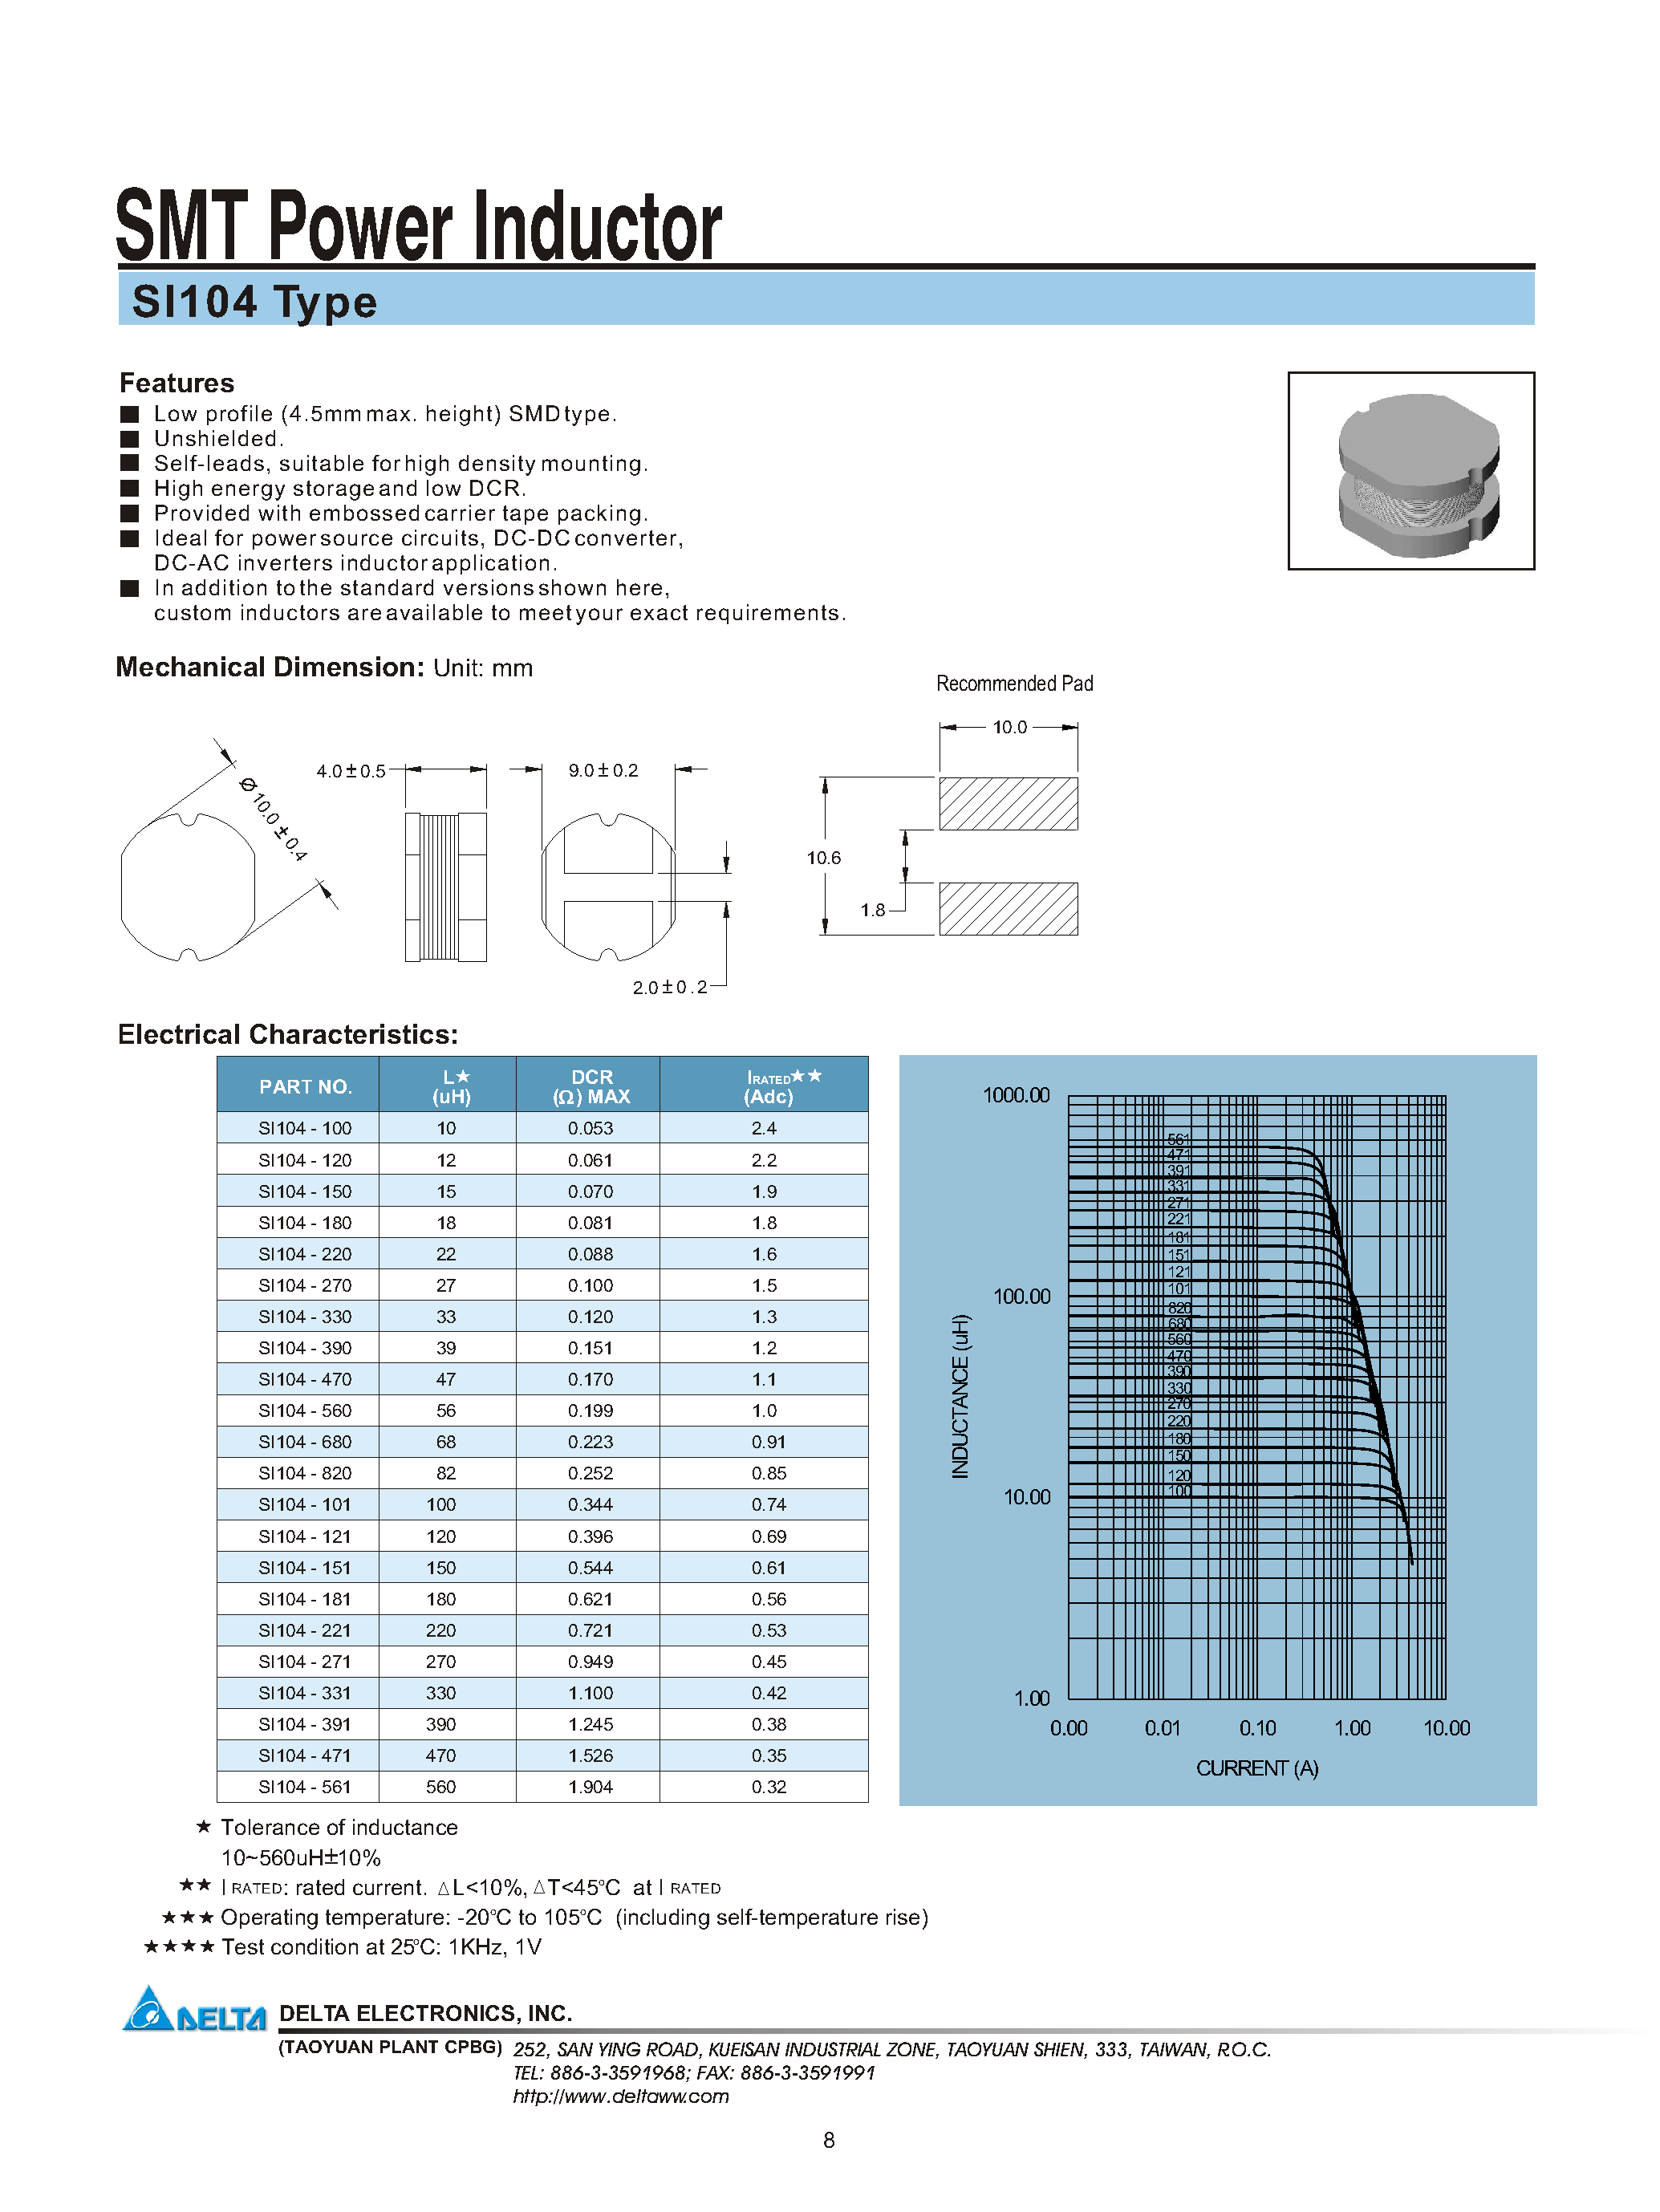 Datasheet SI104-220 - SMT Power Inductor page 1